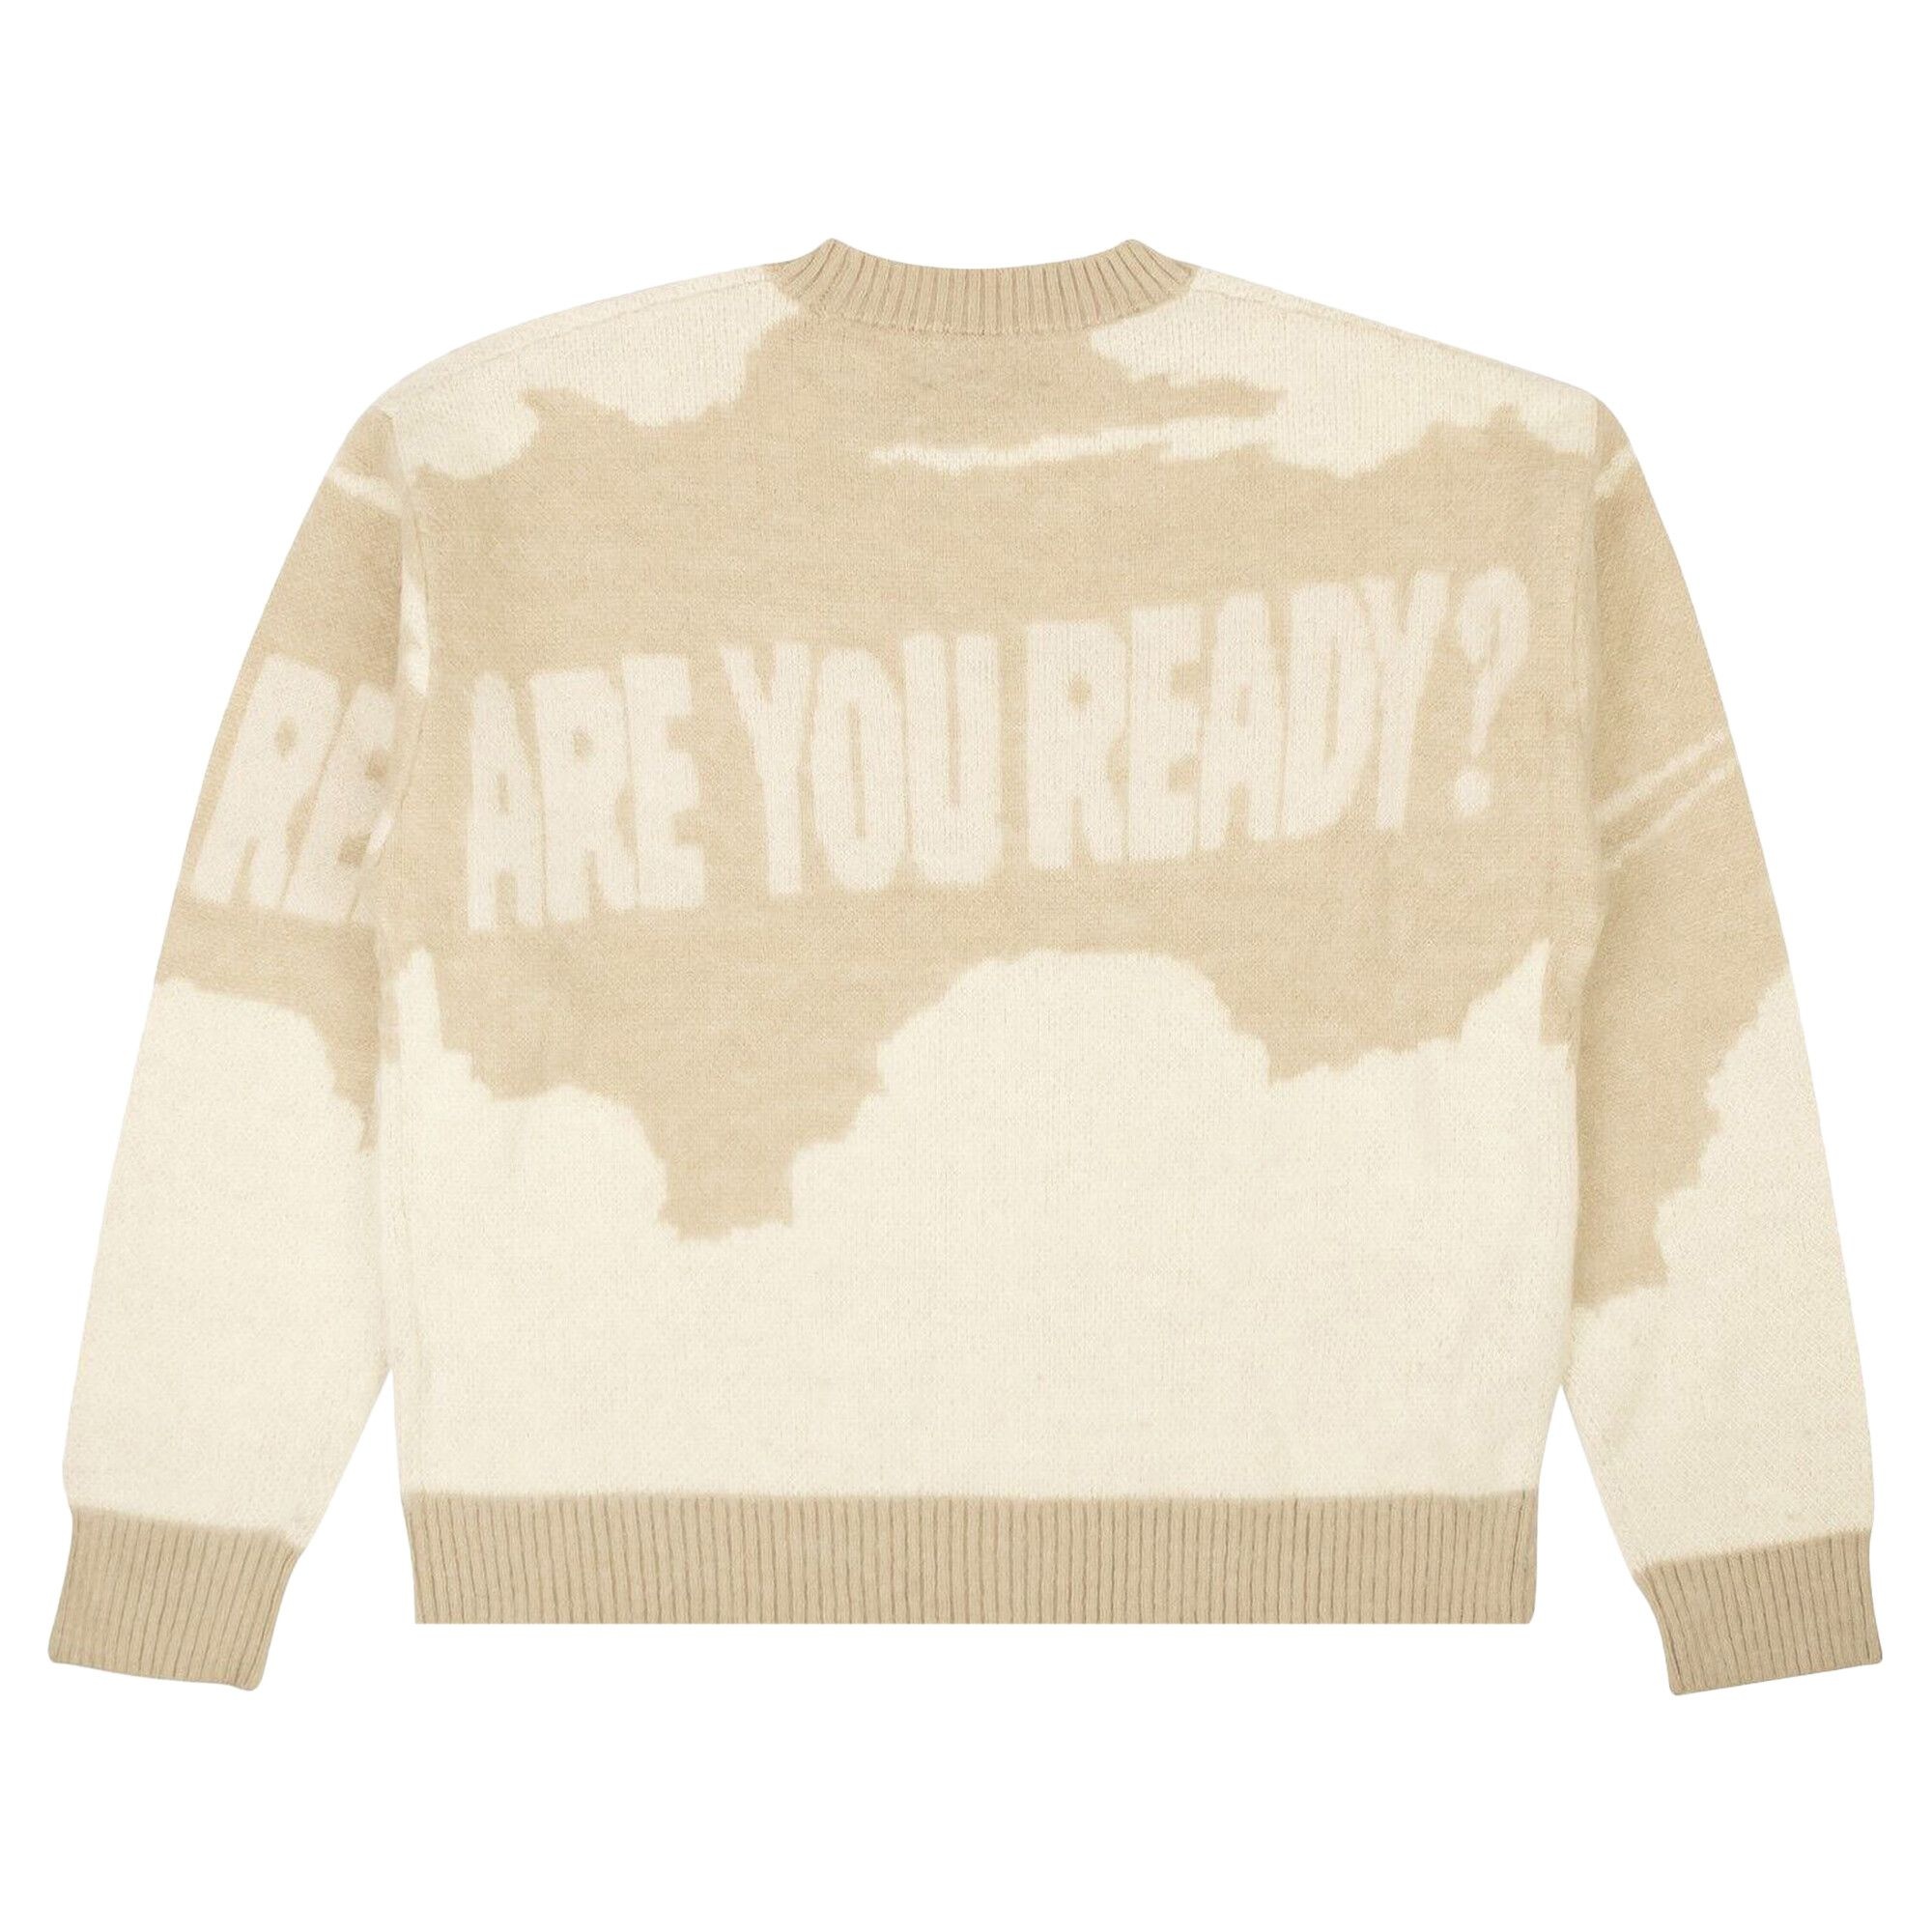 Who Decides War Are You Ready Crewneck Sweater 'Beige' - 2